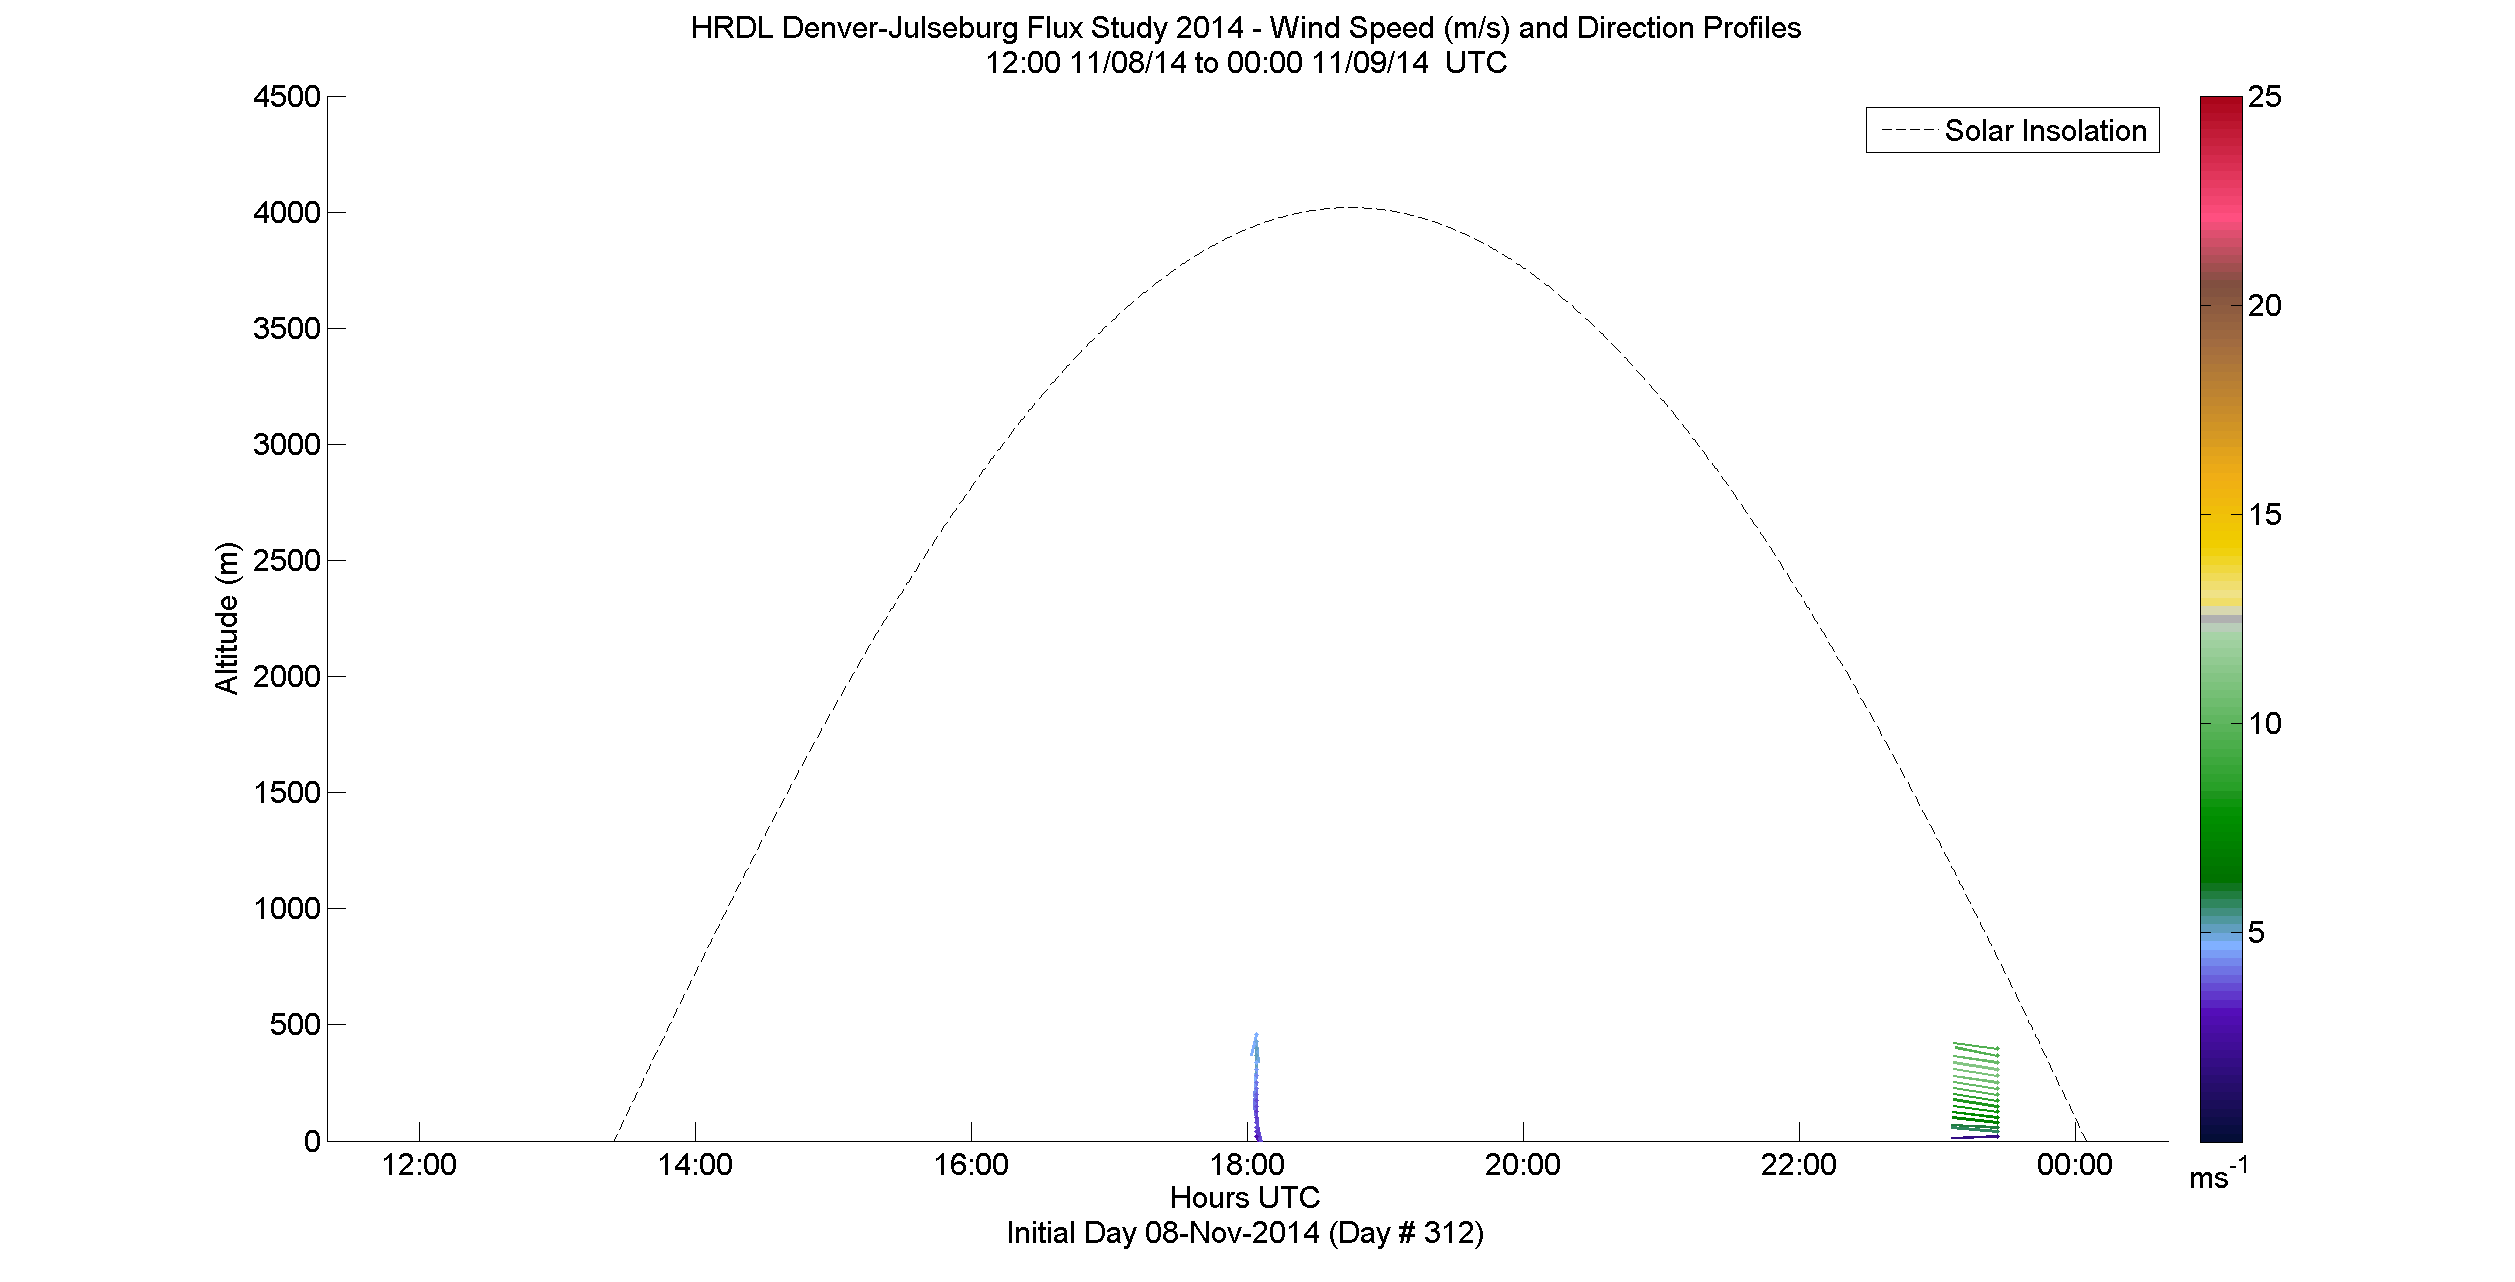 HRDL speed and direction profile - November 8 pm